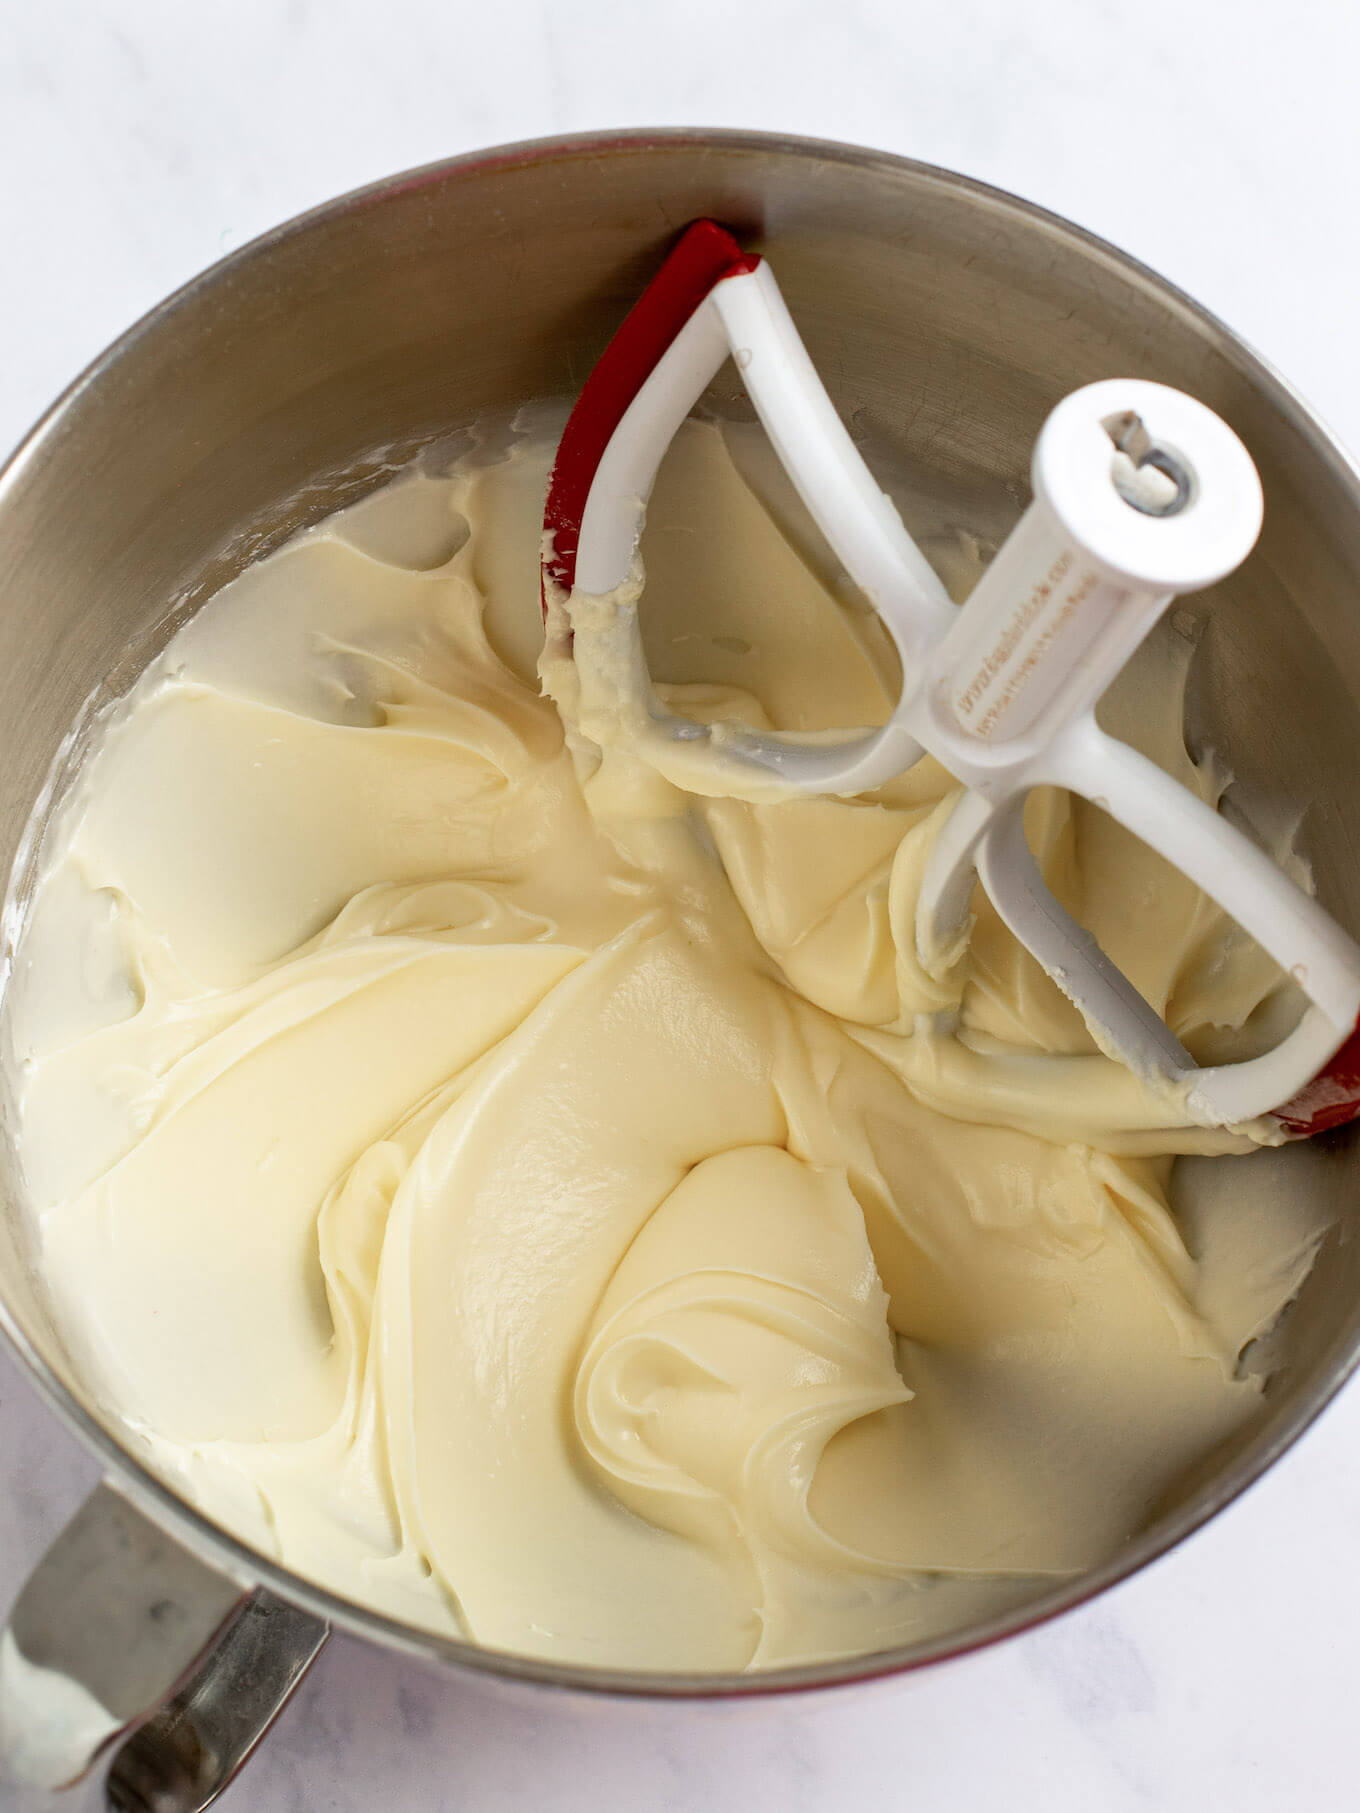 Cream cheese frosting fully mixed together in the bowl of a stand mixer.